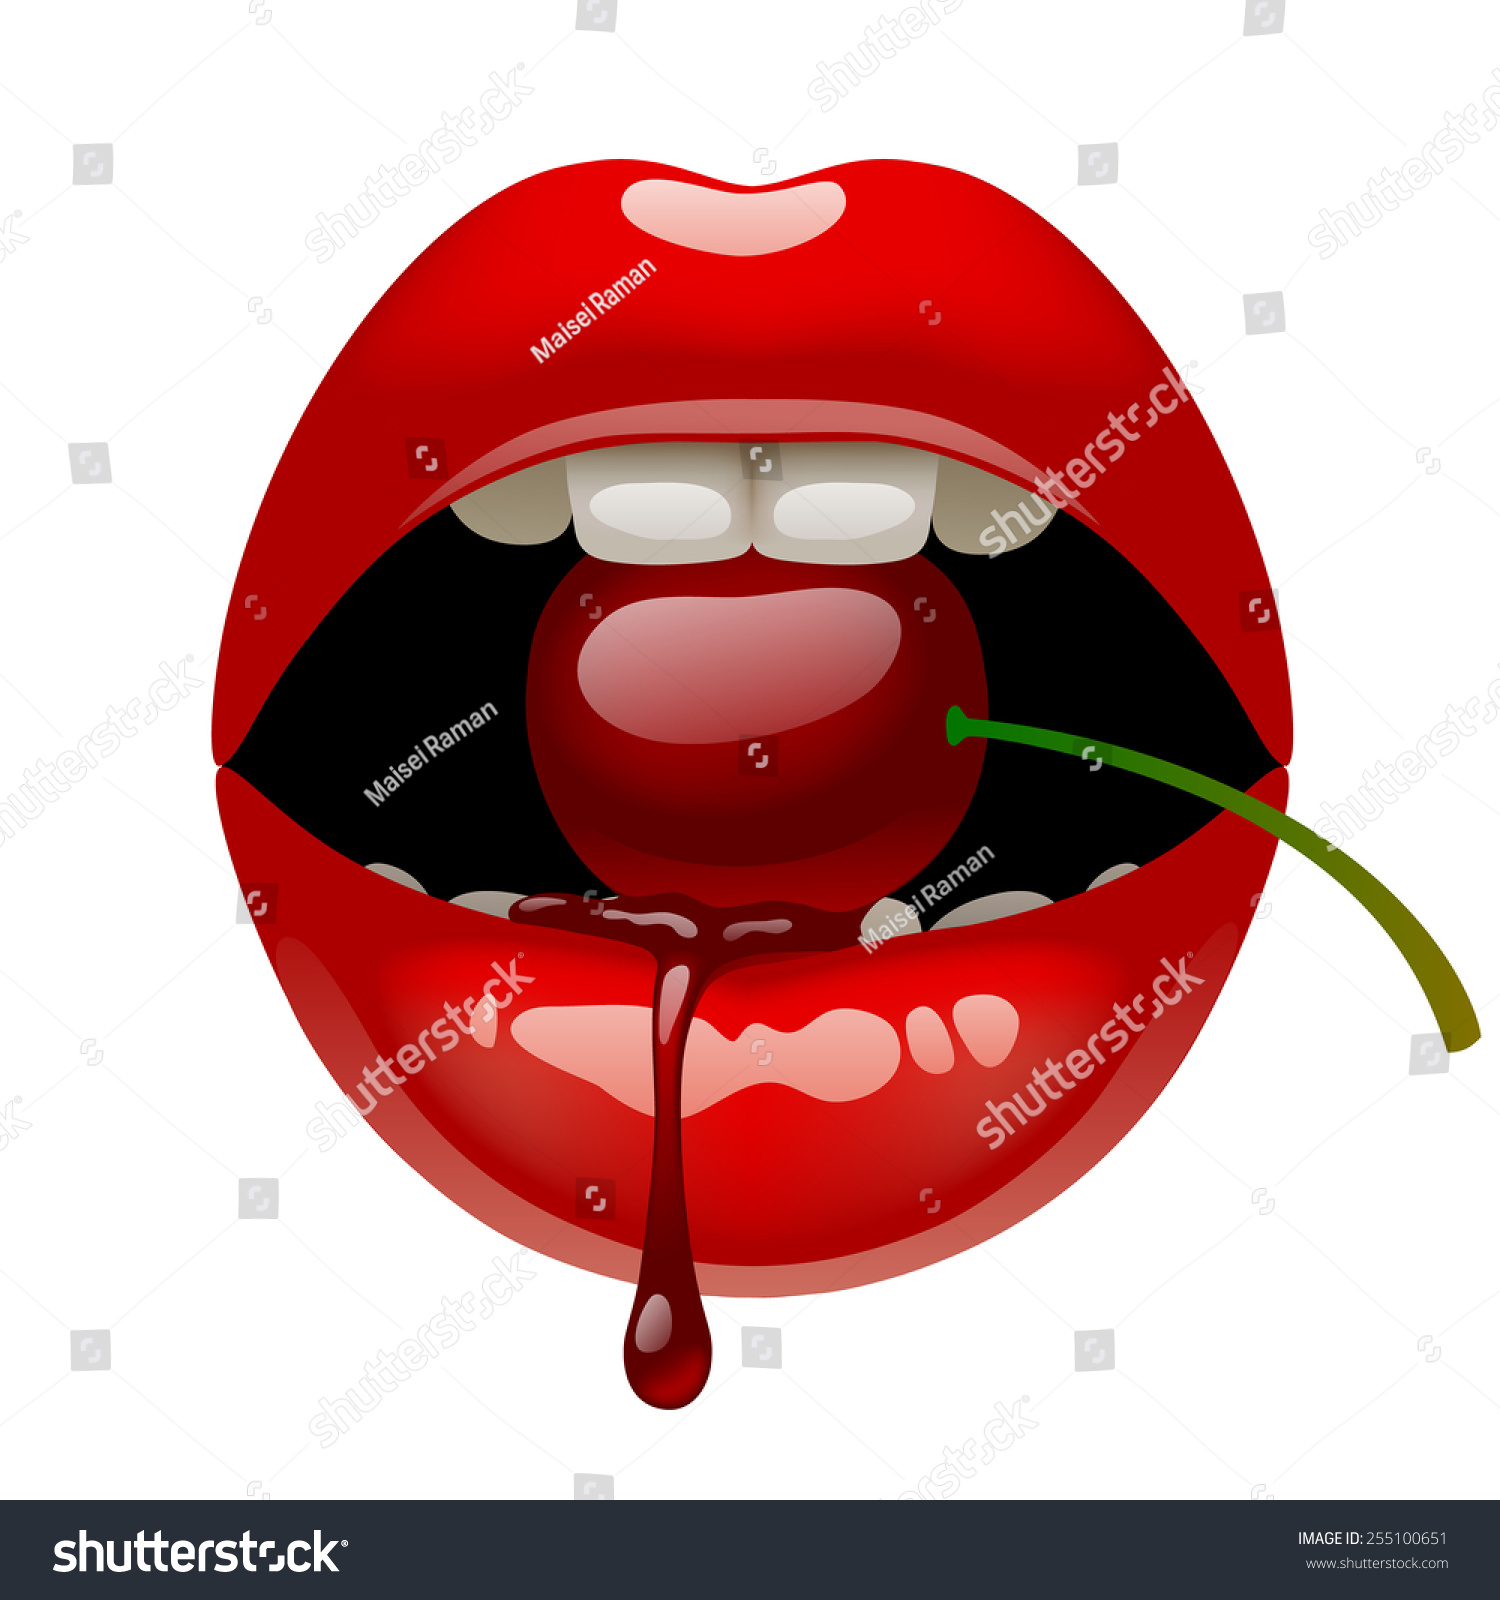 Female Sexy Red Lips Juicy Cherry Stock Vector Royalty Free 255100651